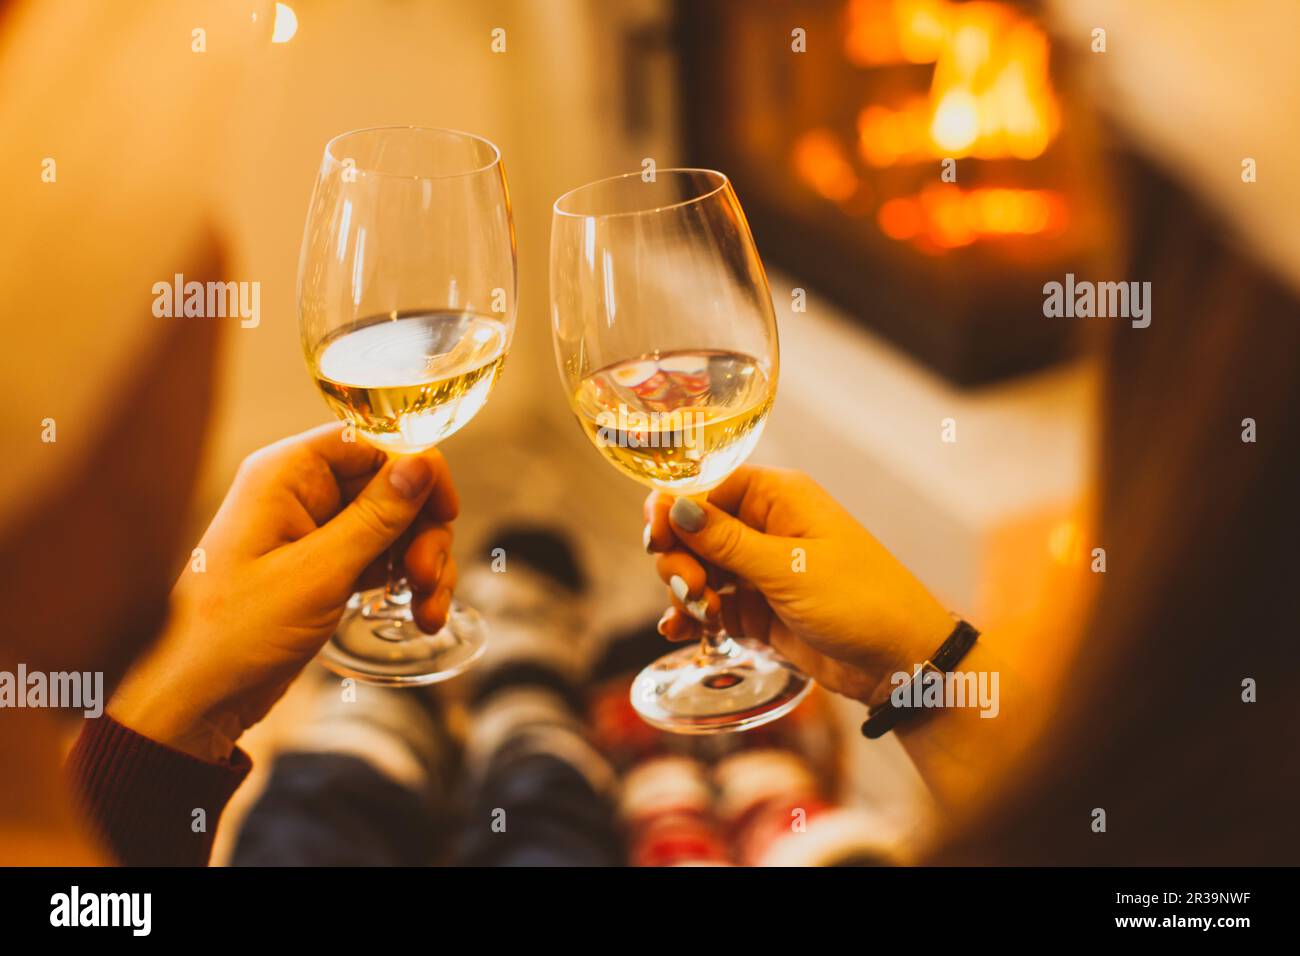 Two glasses of wine in man's and woman's hands Stock Photo